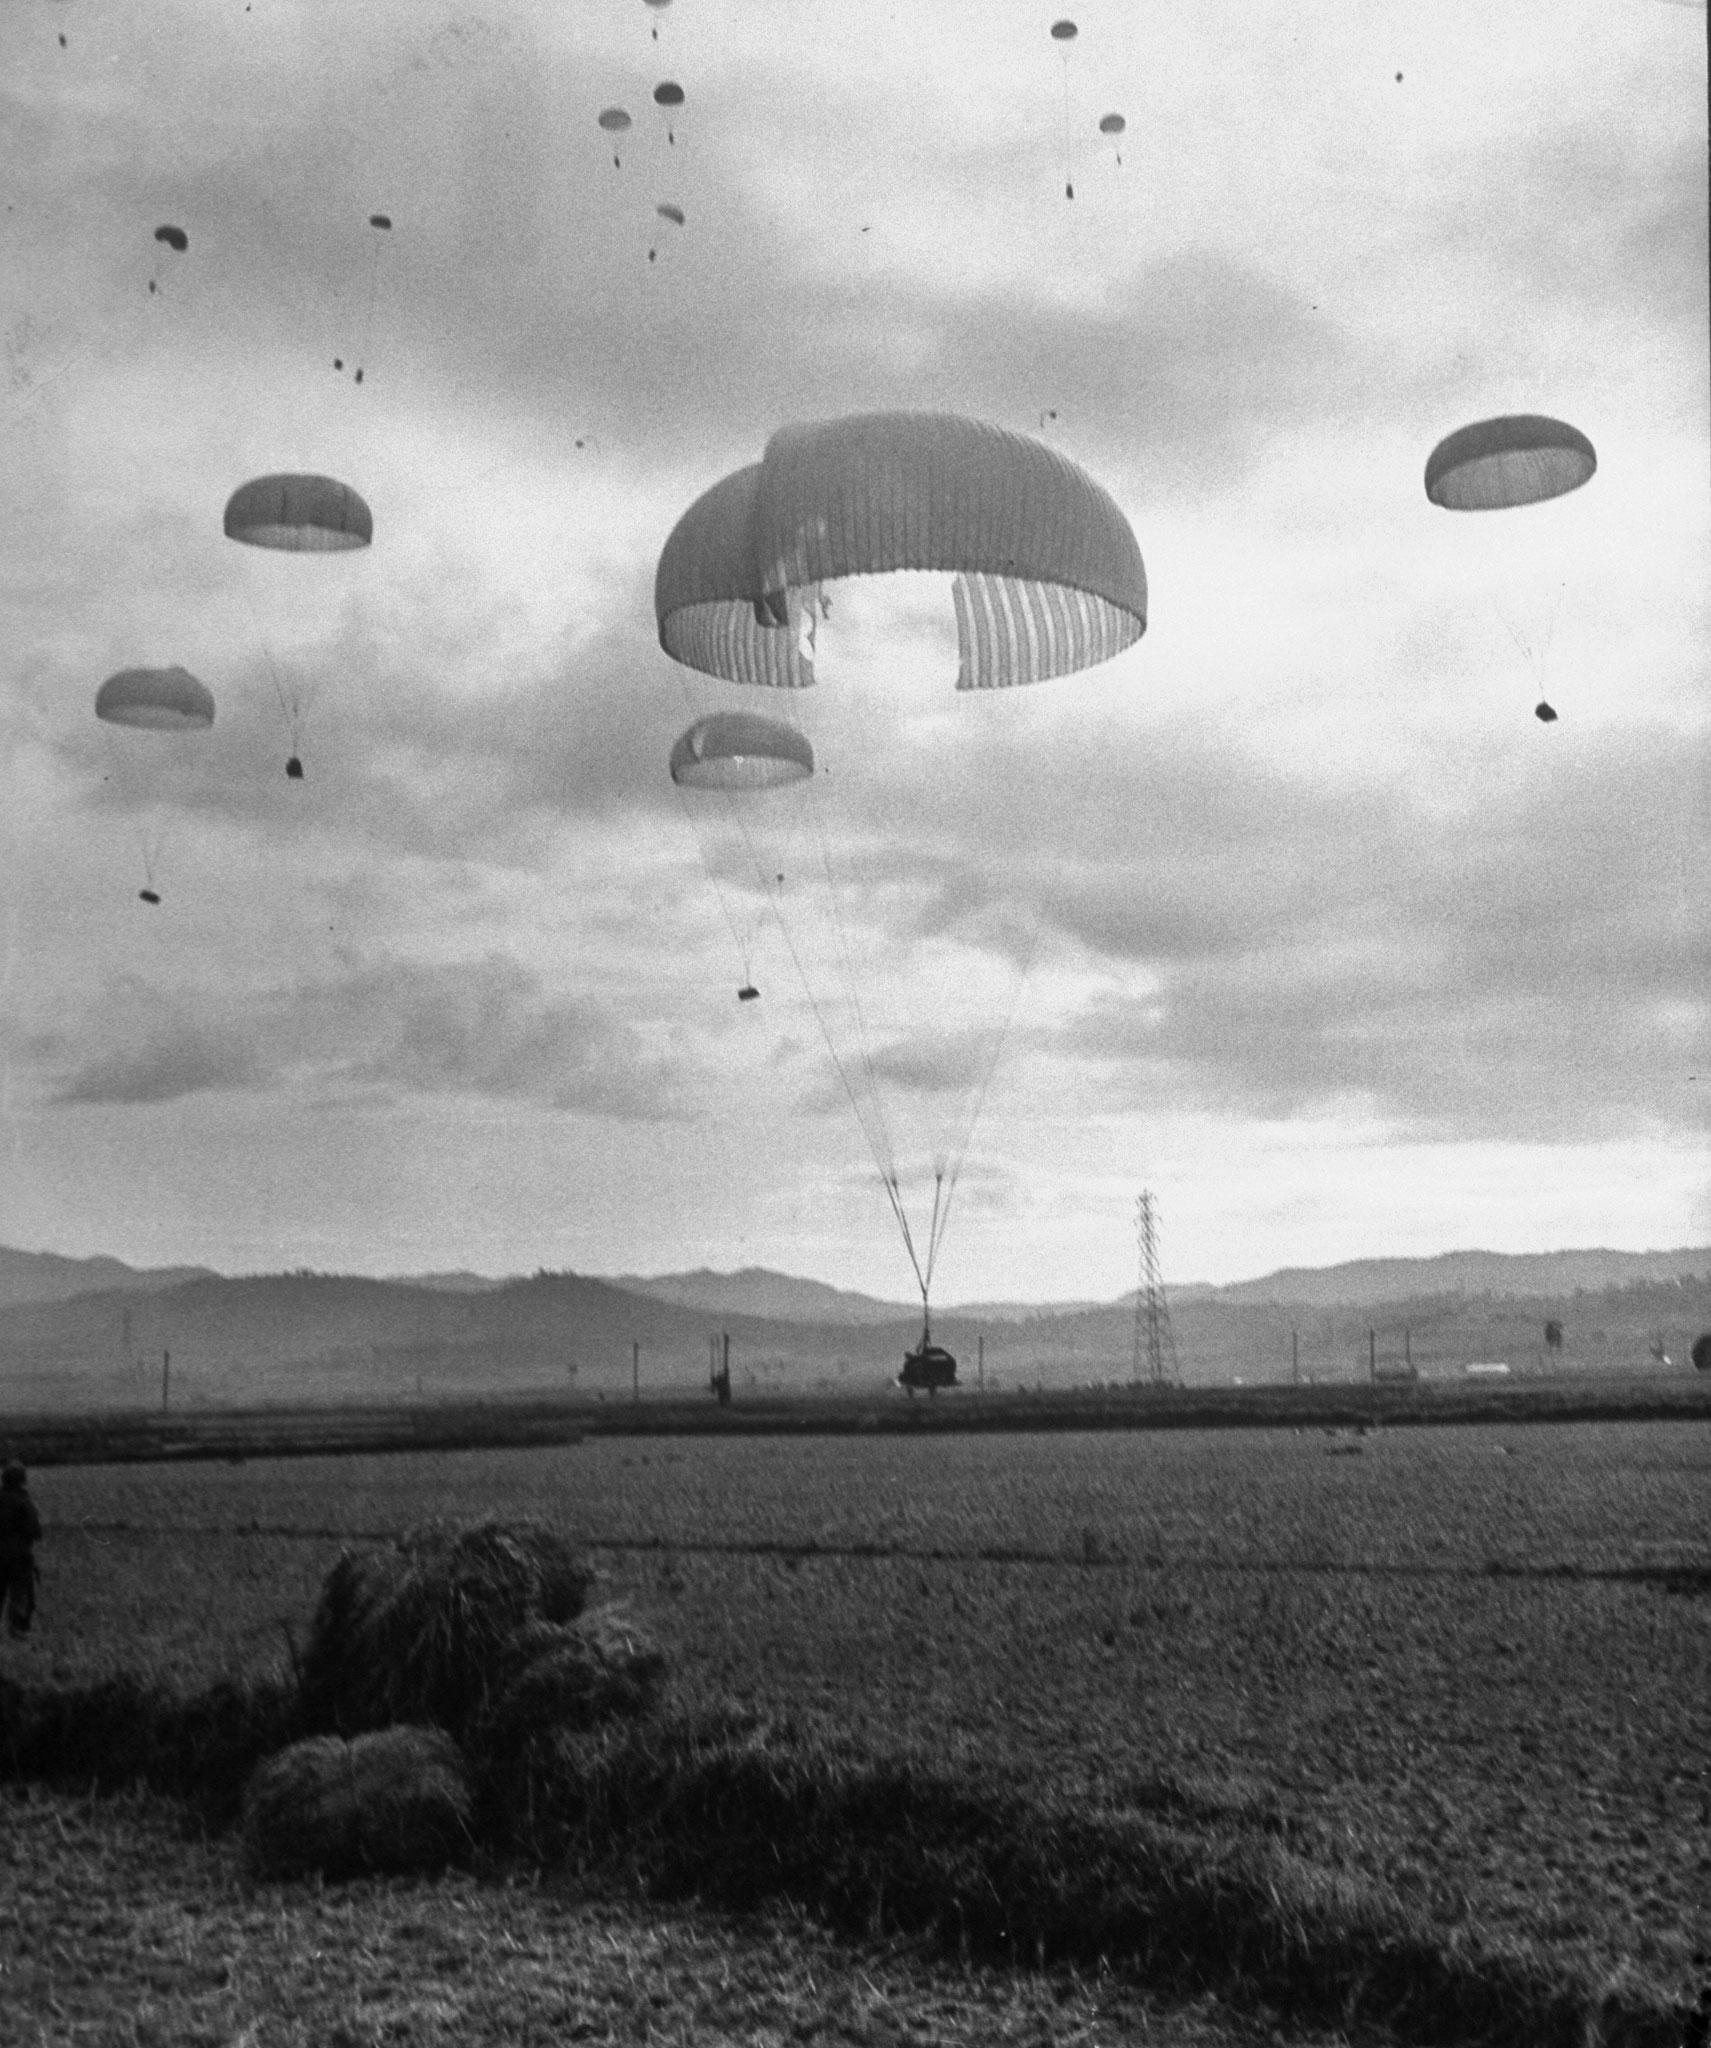 American paratroopers landing in Korea, with one ripped chute still holding enough air to drop safely, 1950.